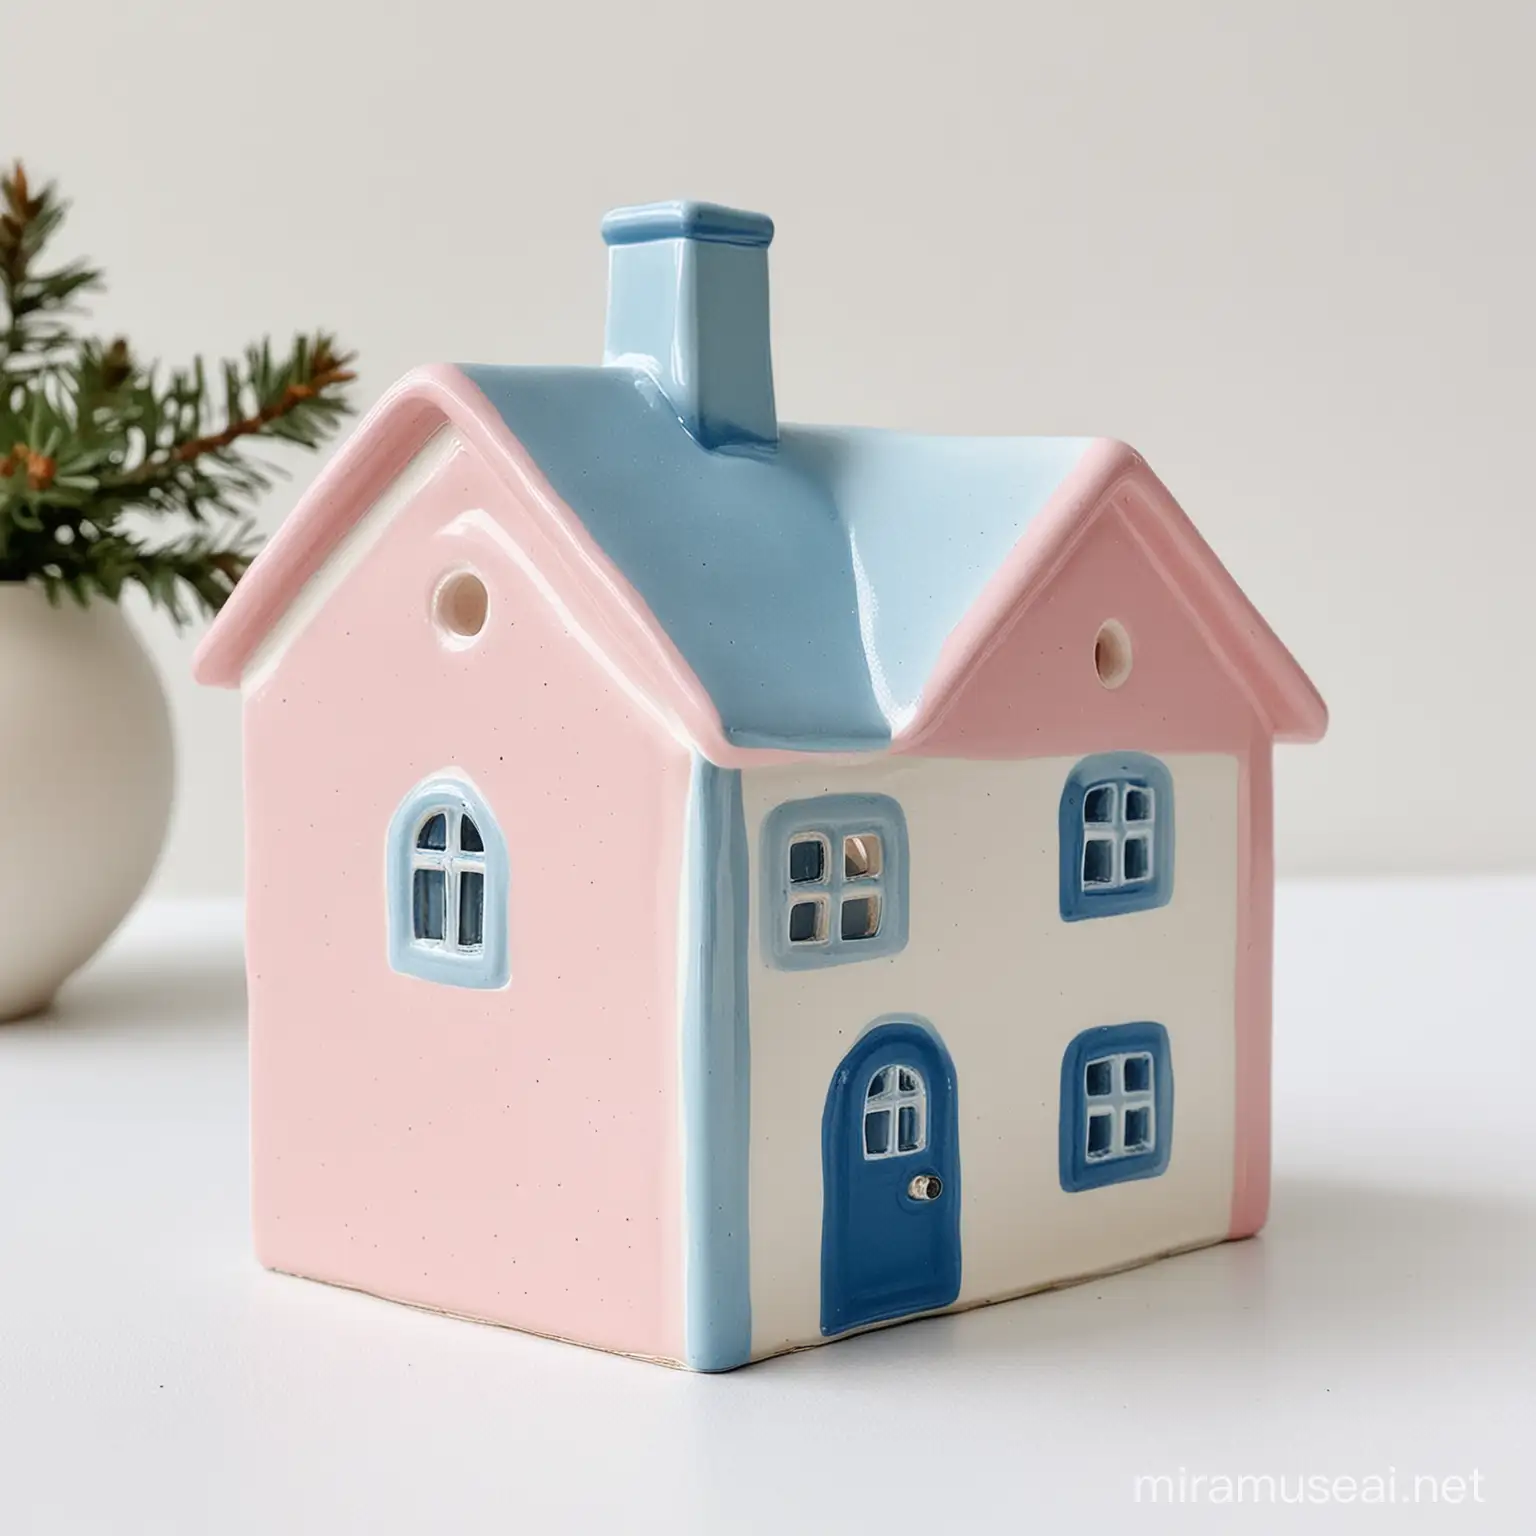 Whimsical Pink and Blue Christmas Ceramic House on White Background